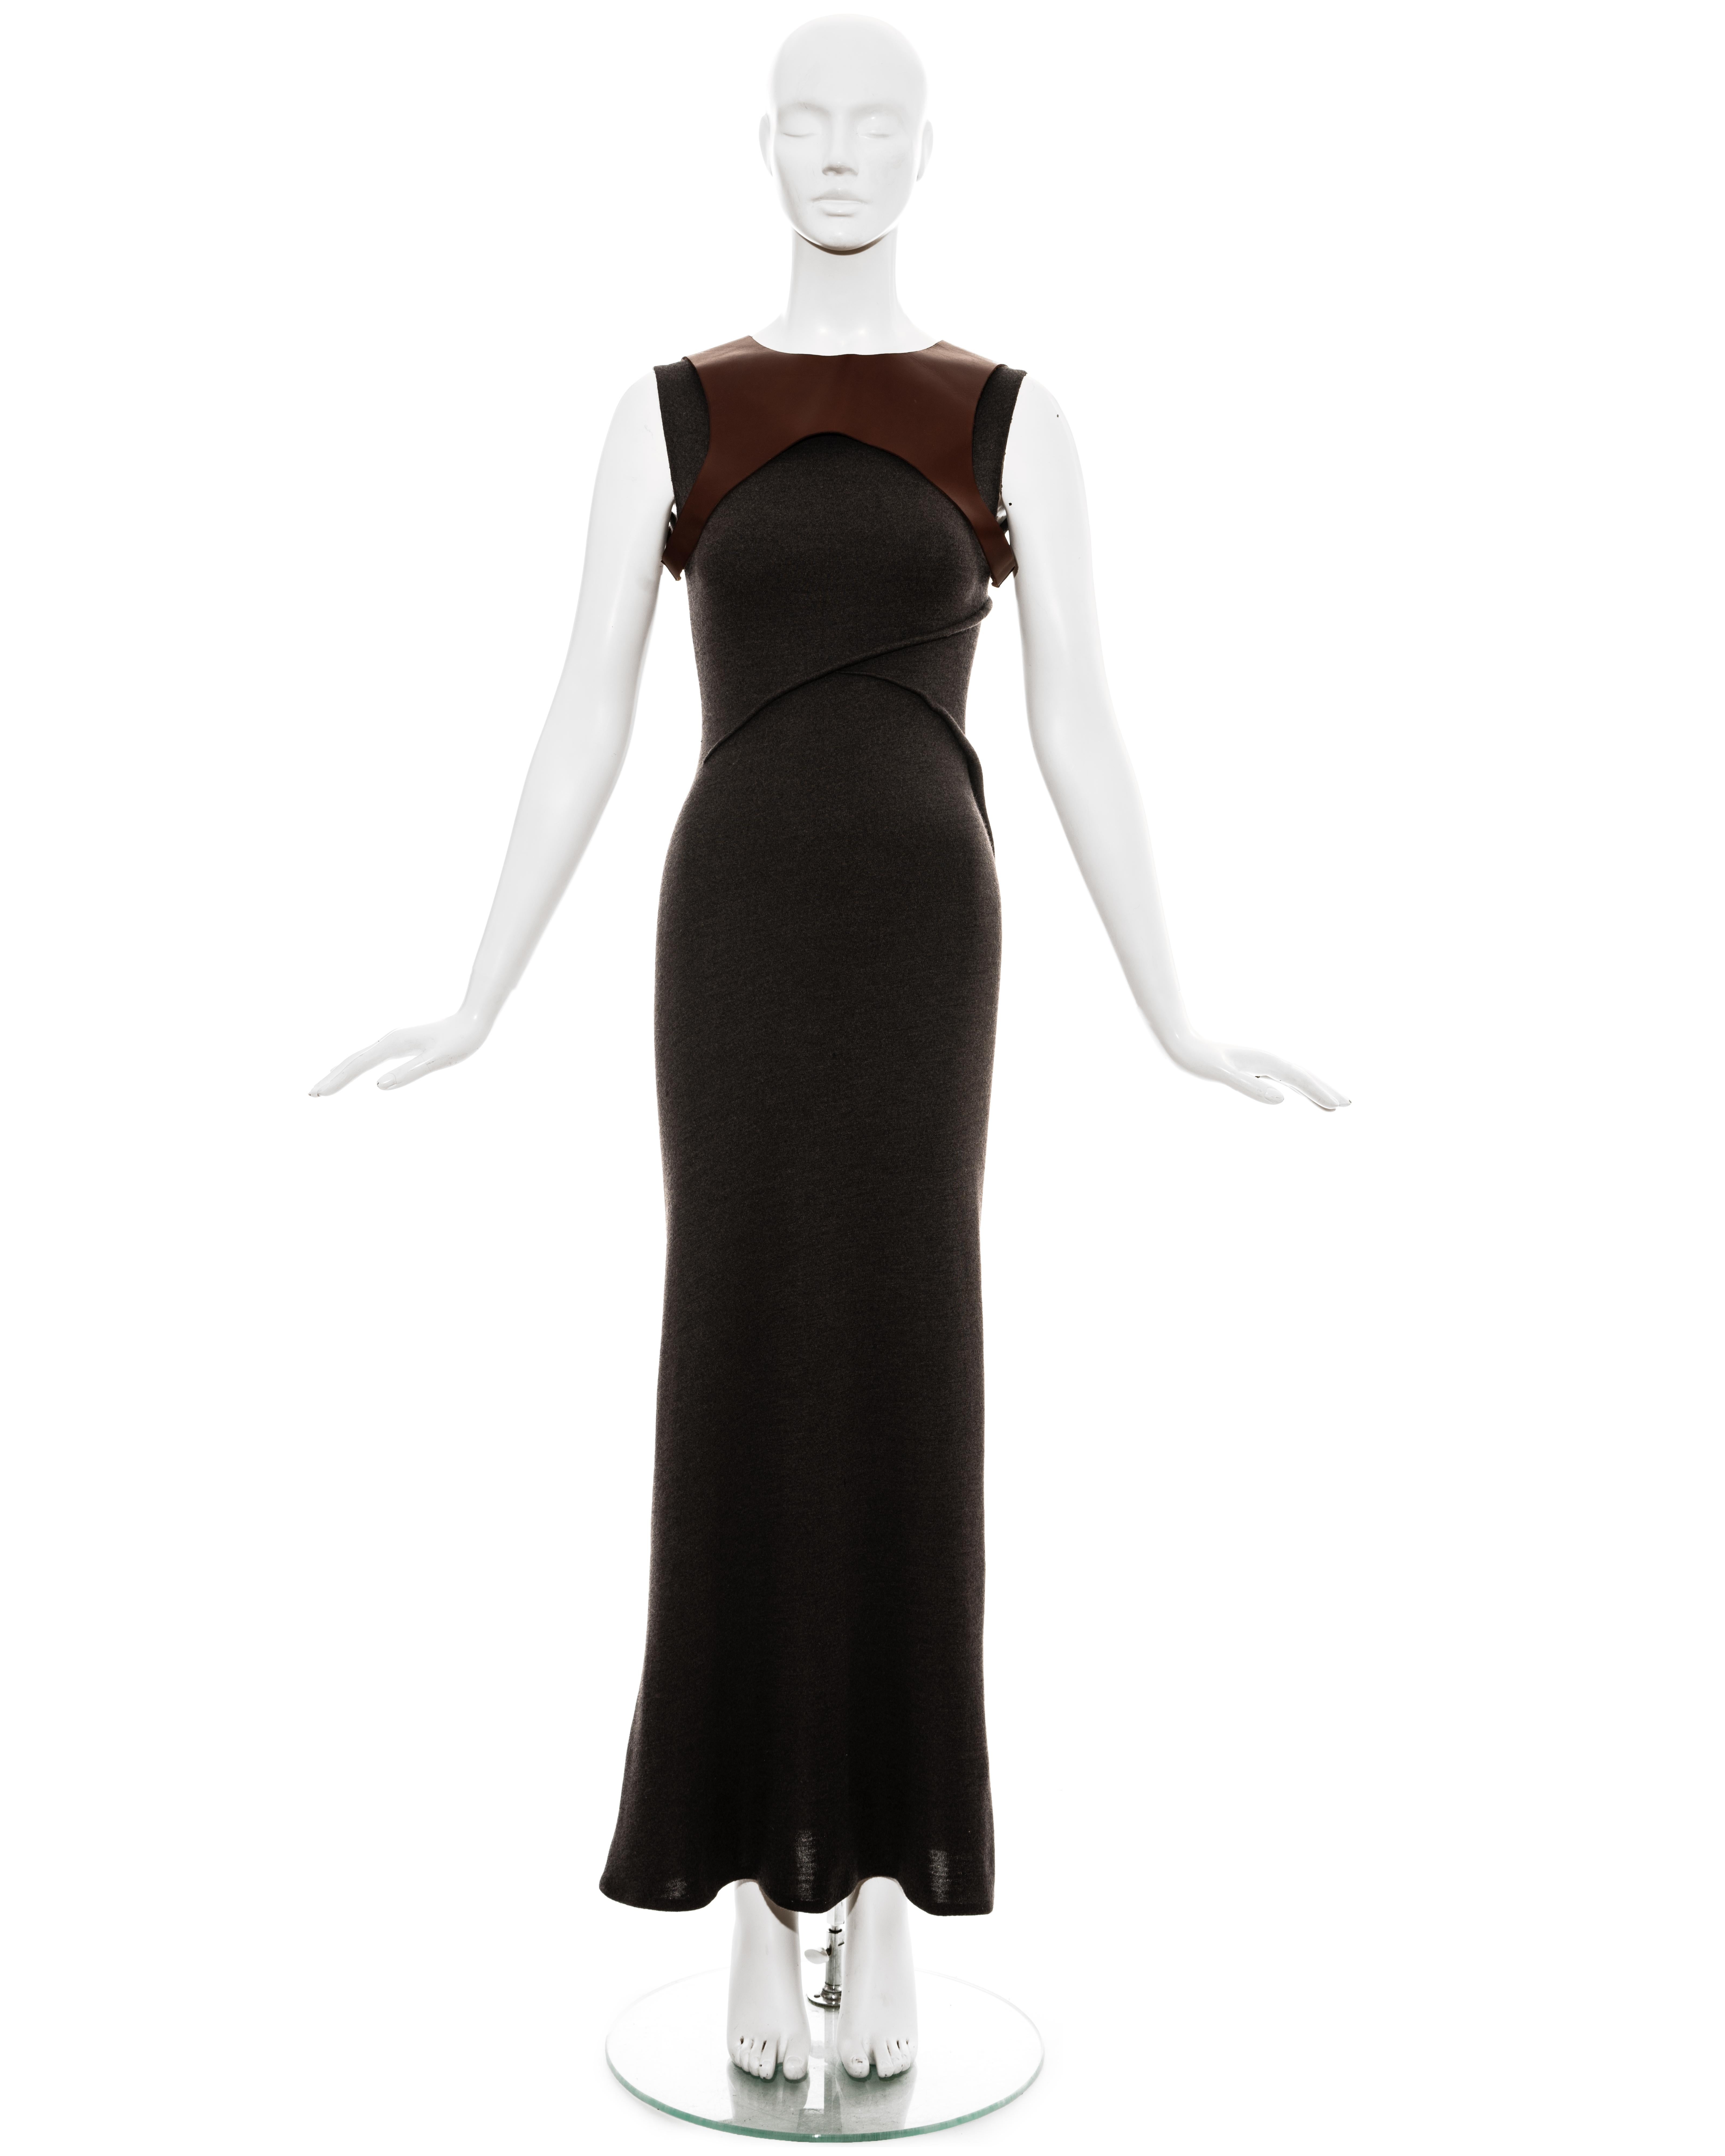 Geoffrey Beene grey wool jersey one seam maxi dress with tubular padded darts around torso and brown leather backless harness. 

Spring-Summer 1999